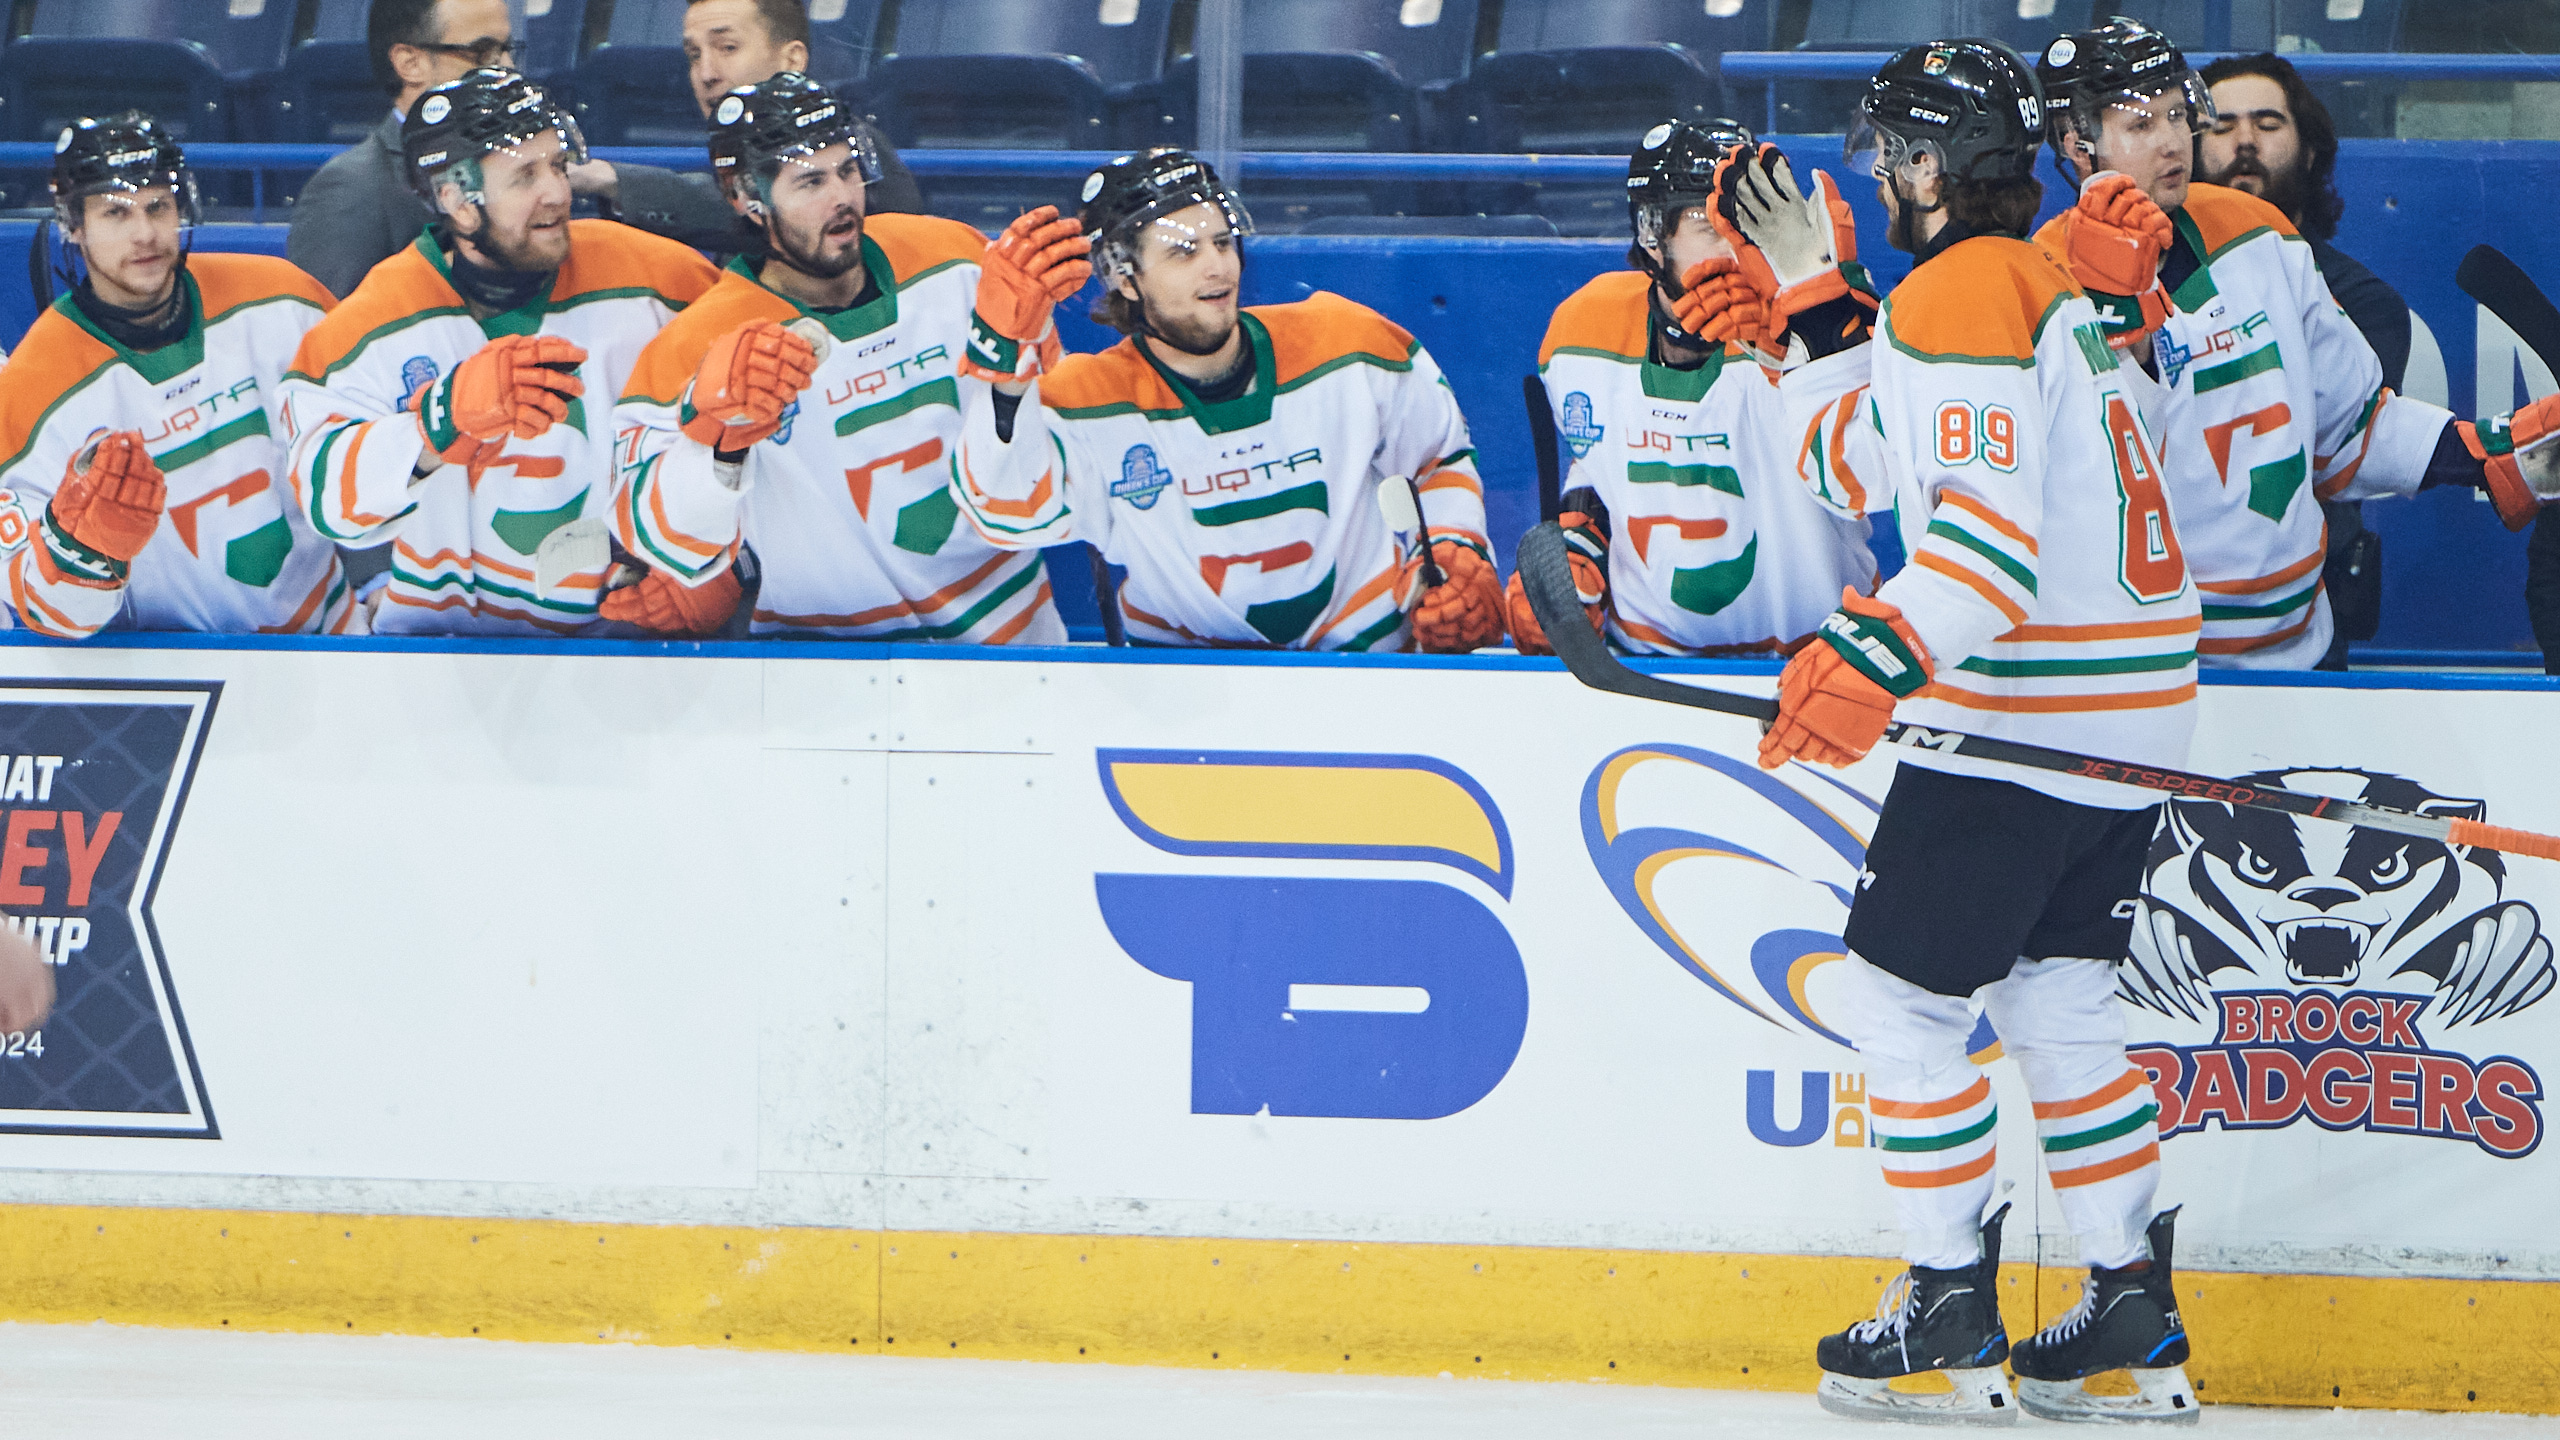 A player from UQTR high fives his bench